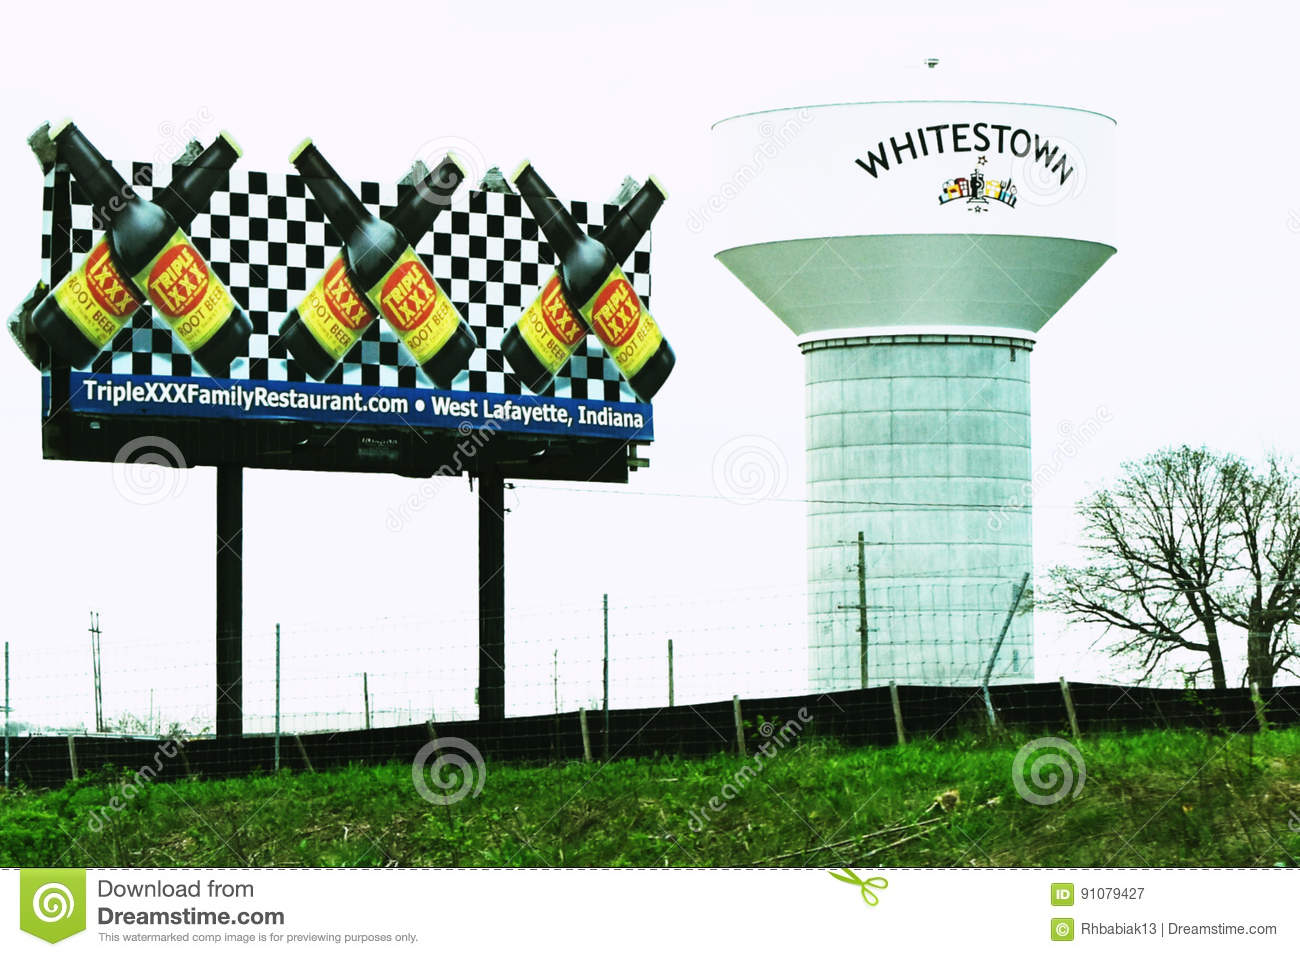 whitestown water tower and triple whitestown water tower and a billboard for triple xxx